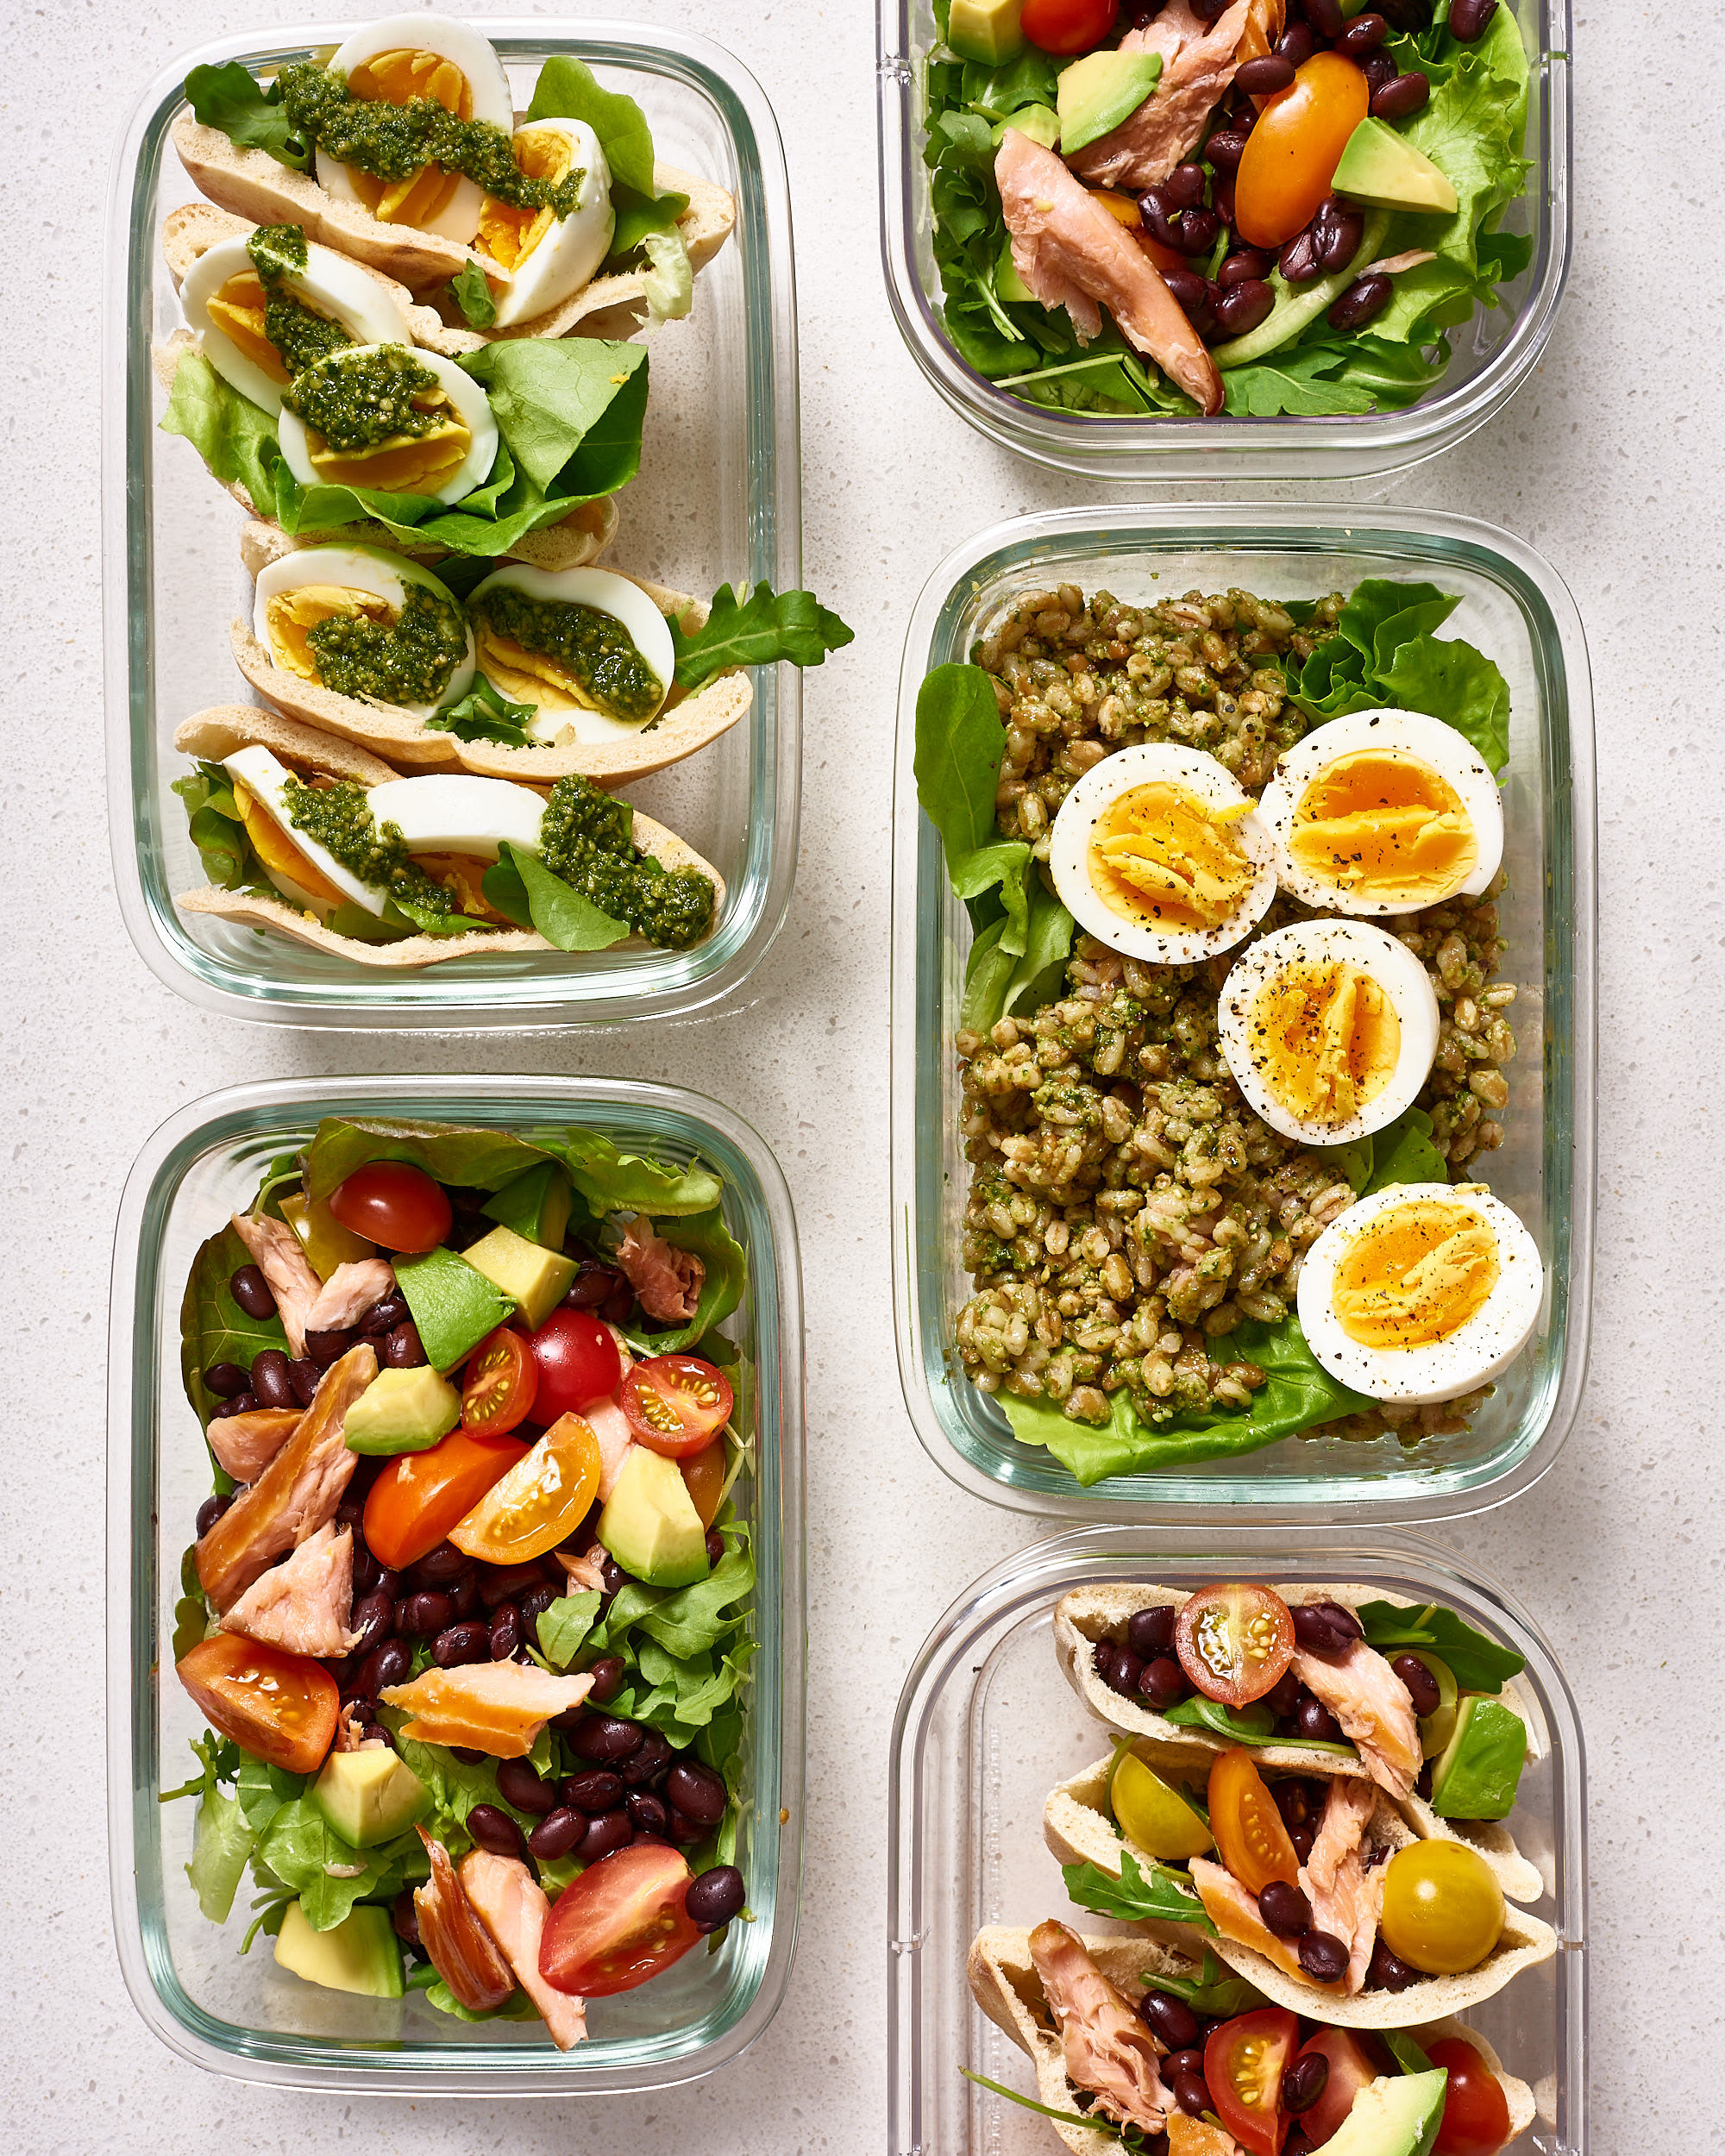 Quick and Simple 21 Day Fix Meal Preps for Every Calorie Level